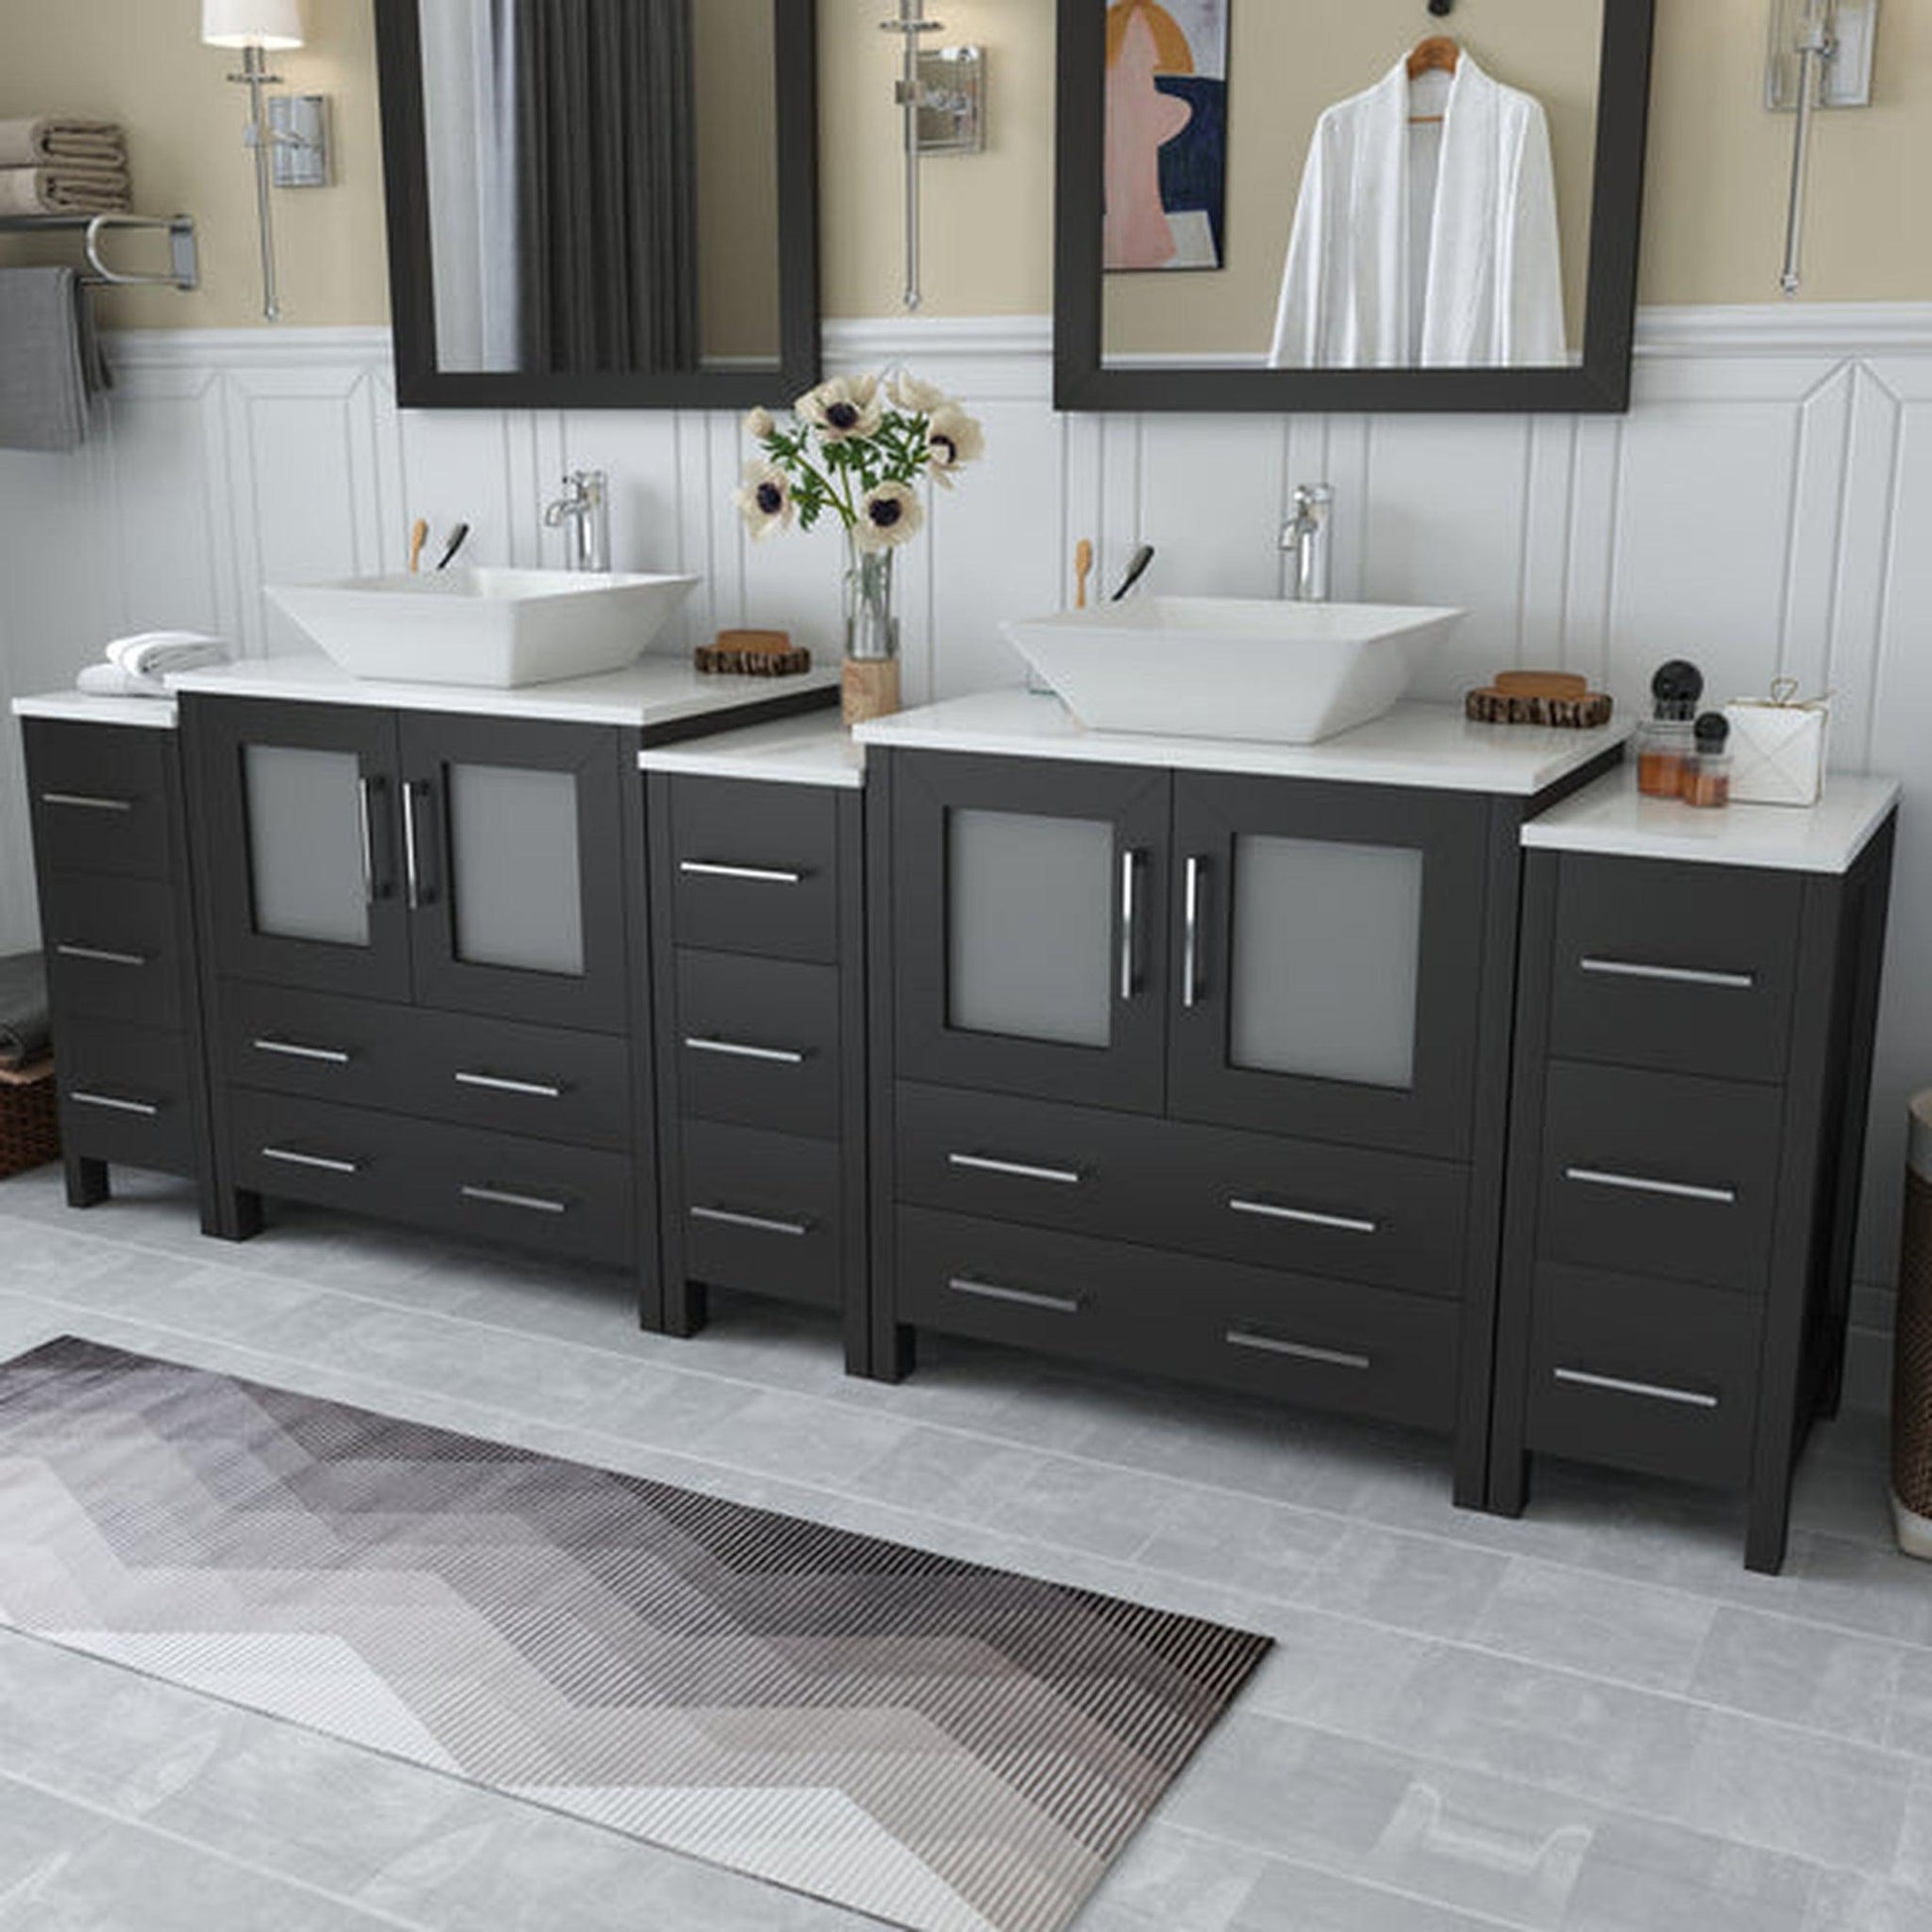 Vanity Art Ravenna 96" Double Espresso Freestanding Vanity Set With White Engineered Marble Top, 2 Ceramic Vessel Sinks, 3 Side Cabinets and 2 Mirrors